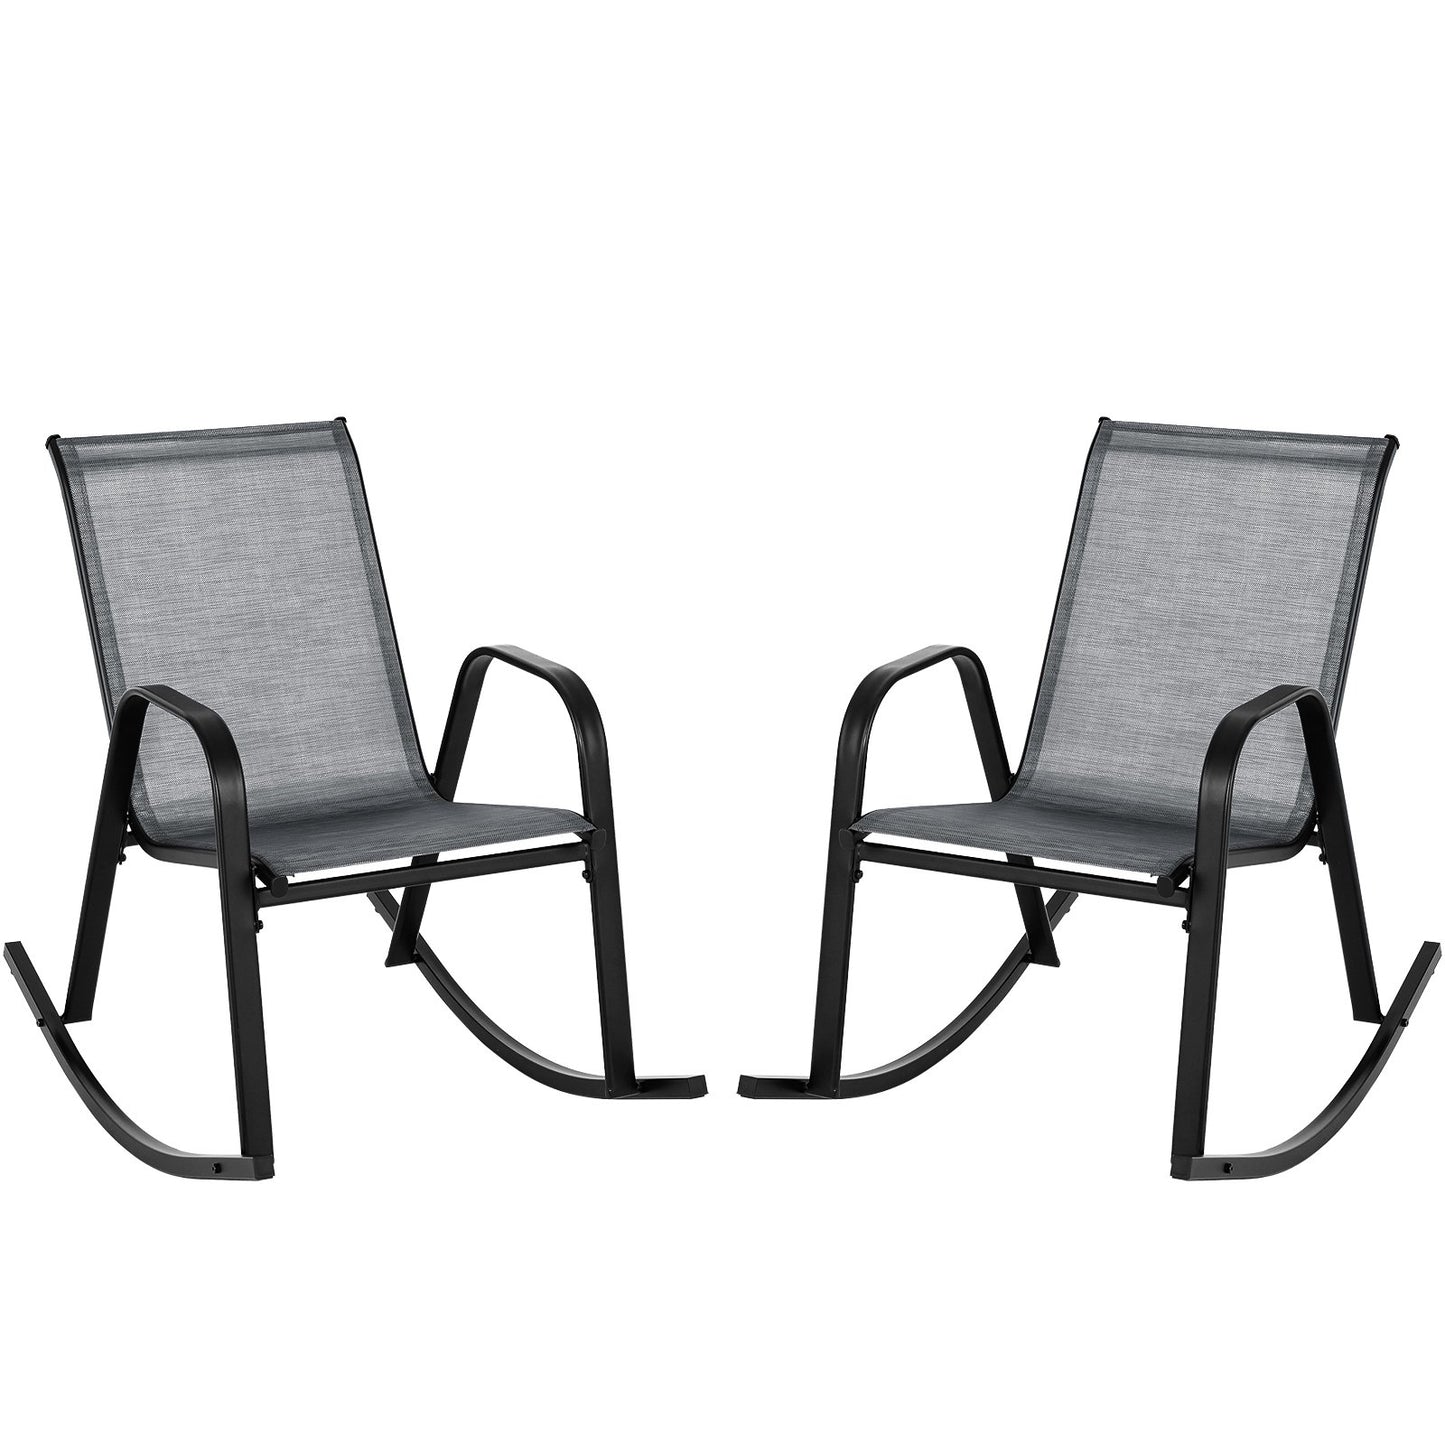 Set of 2 Metal Patio Rocking Chair with Breathable Seat Fabric, Gray